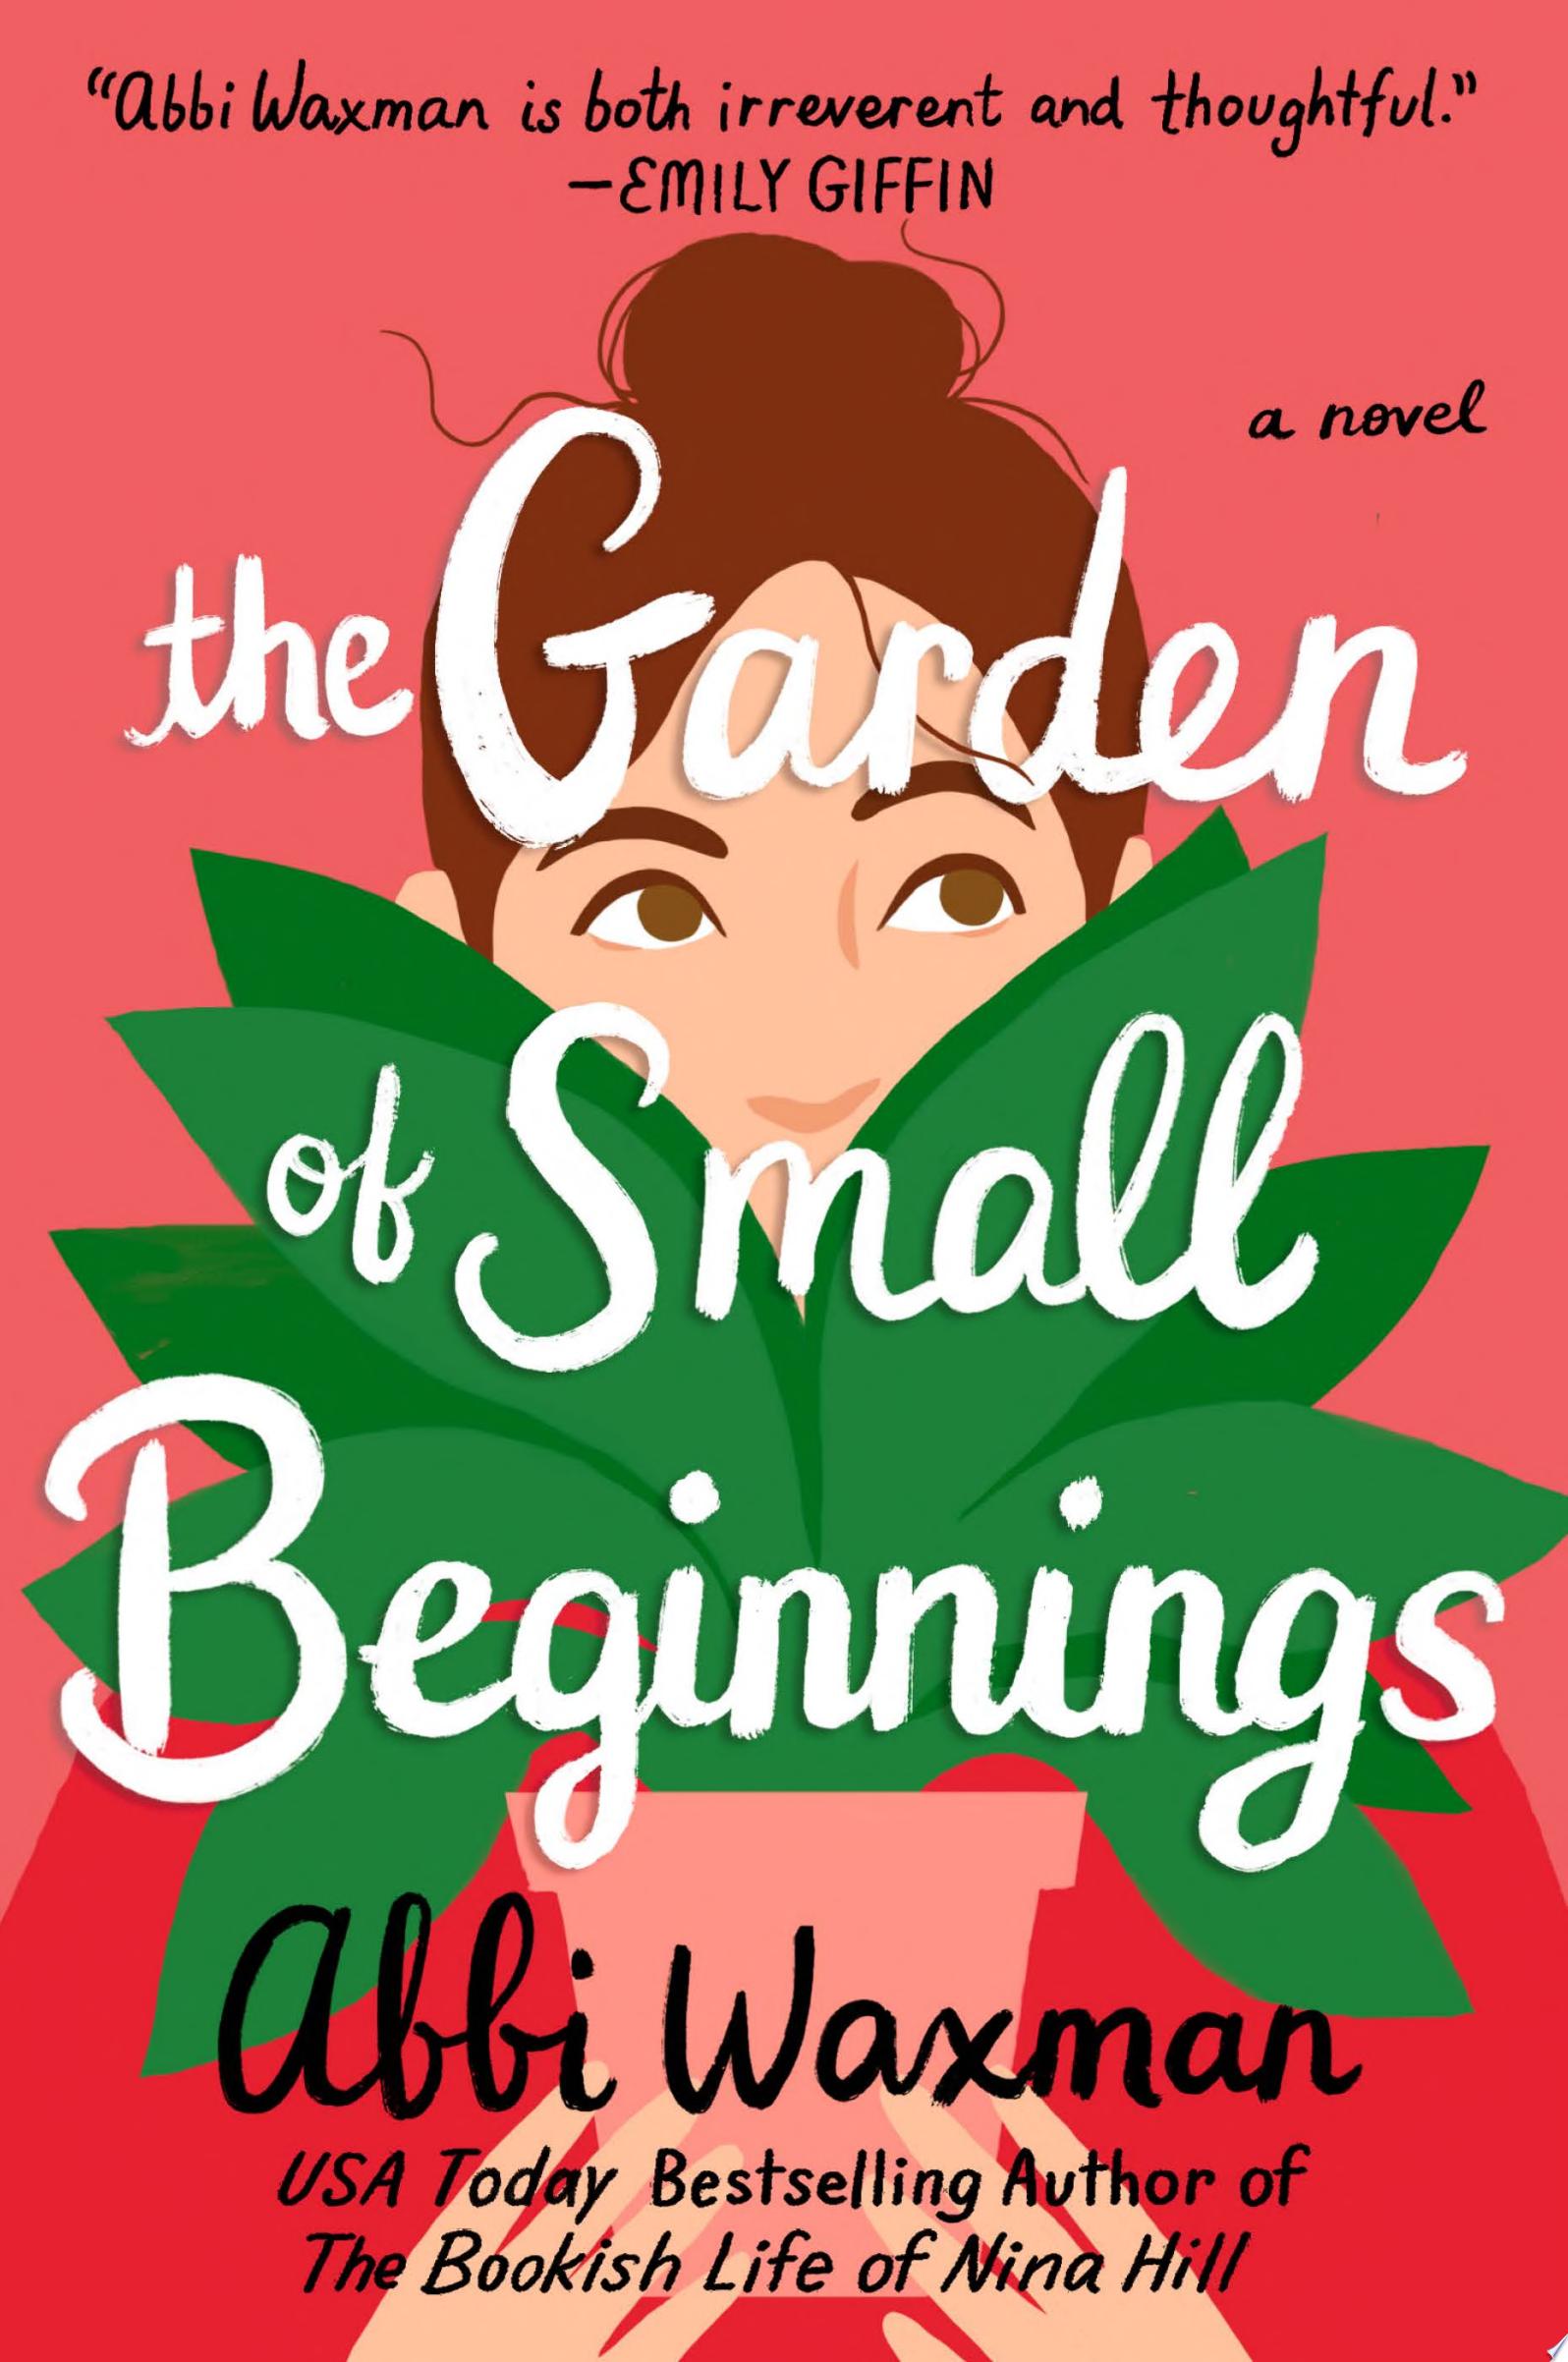 Image for "The Garden of Small Beginnings"